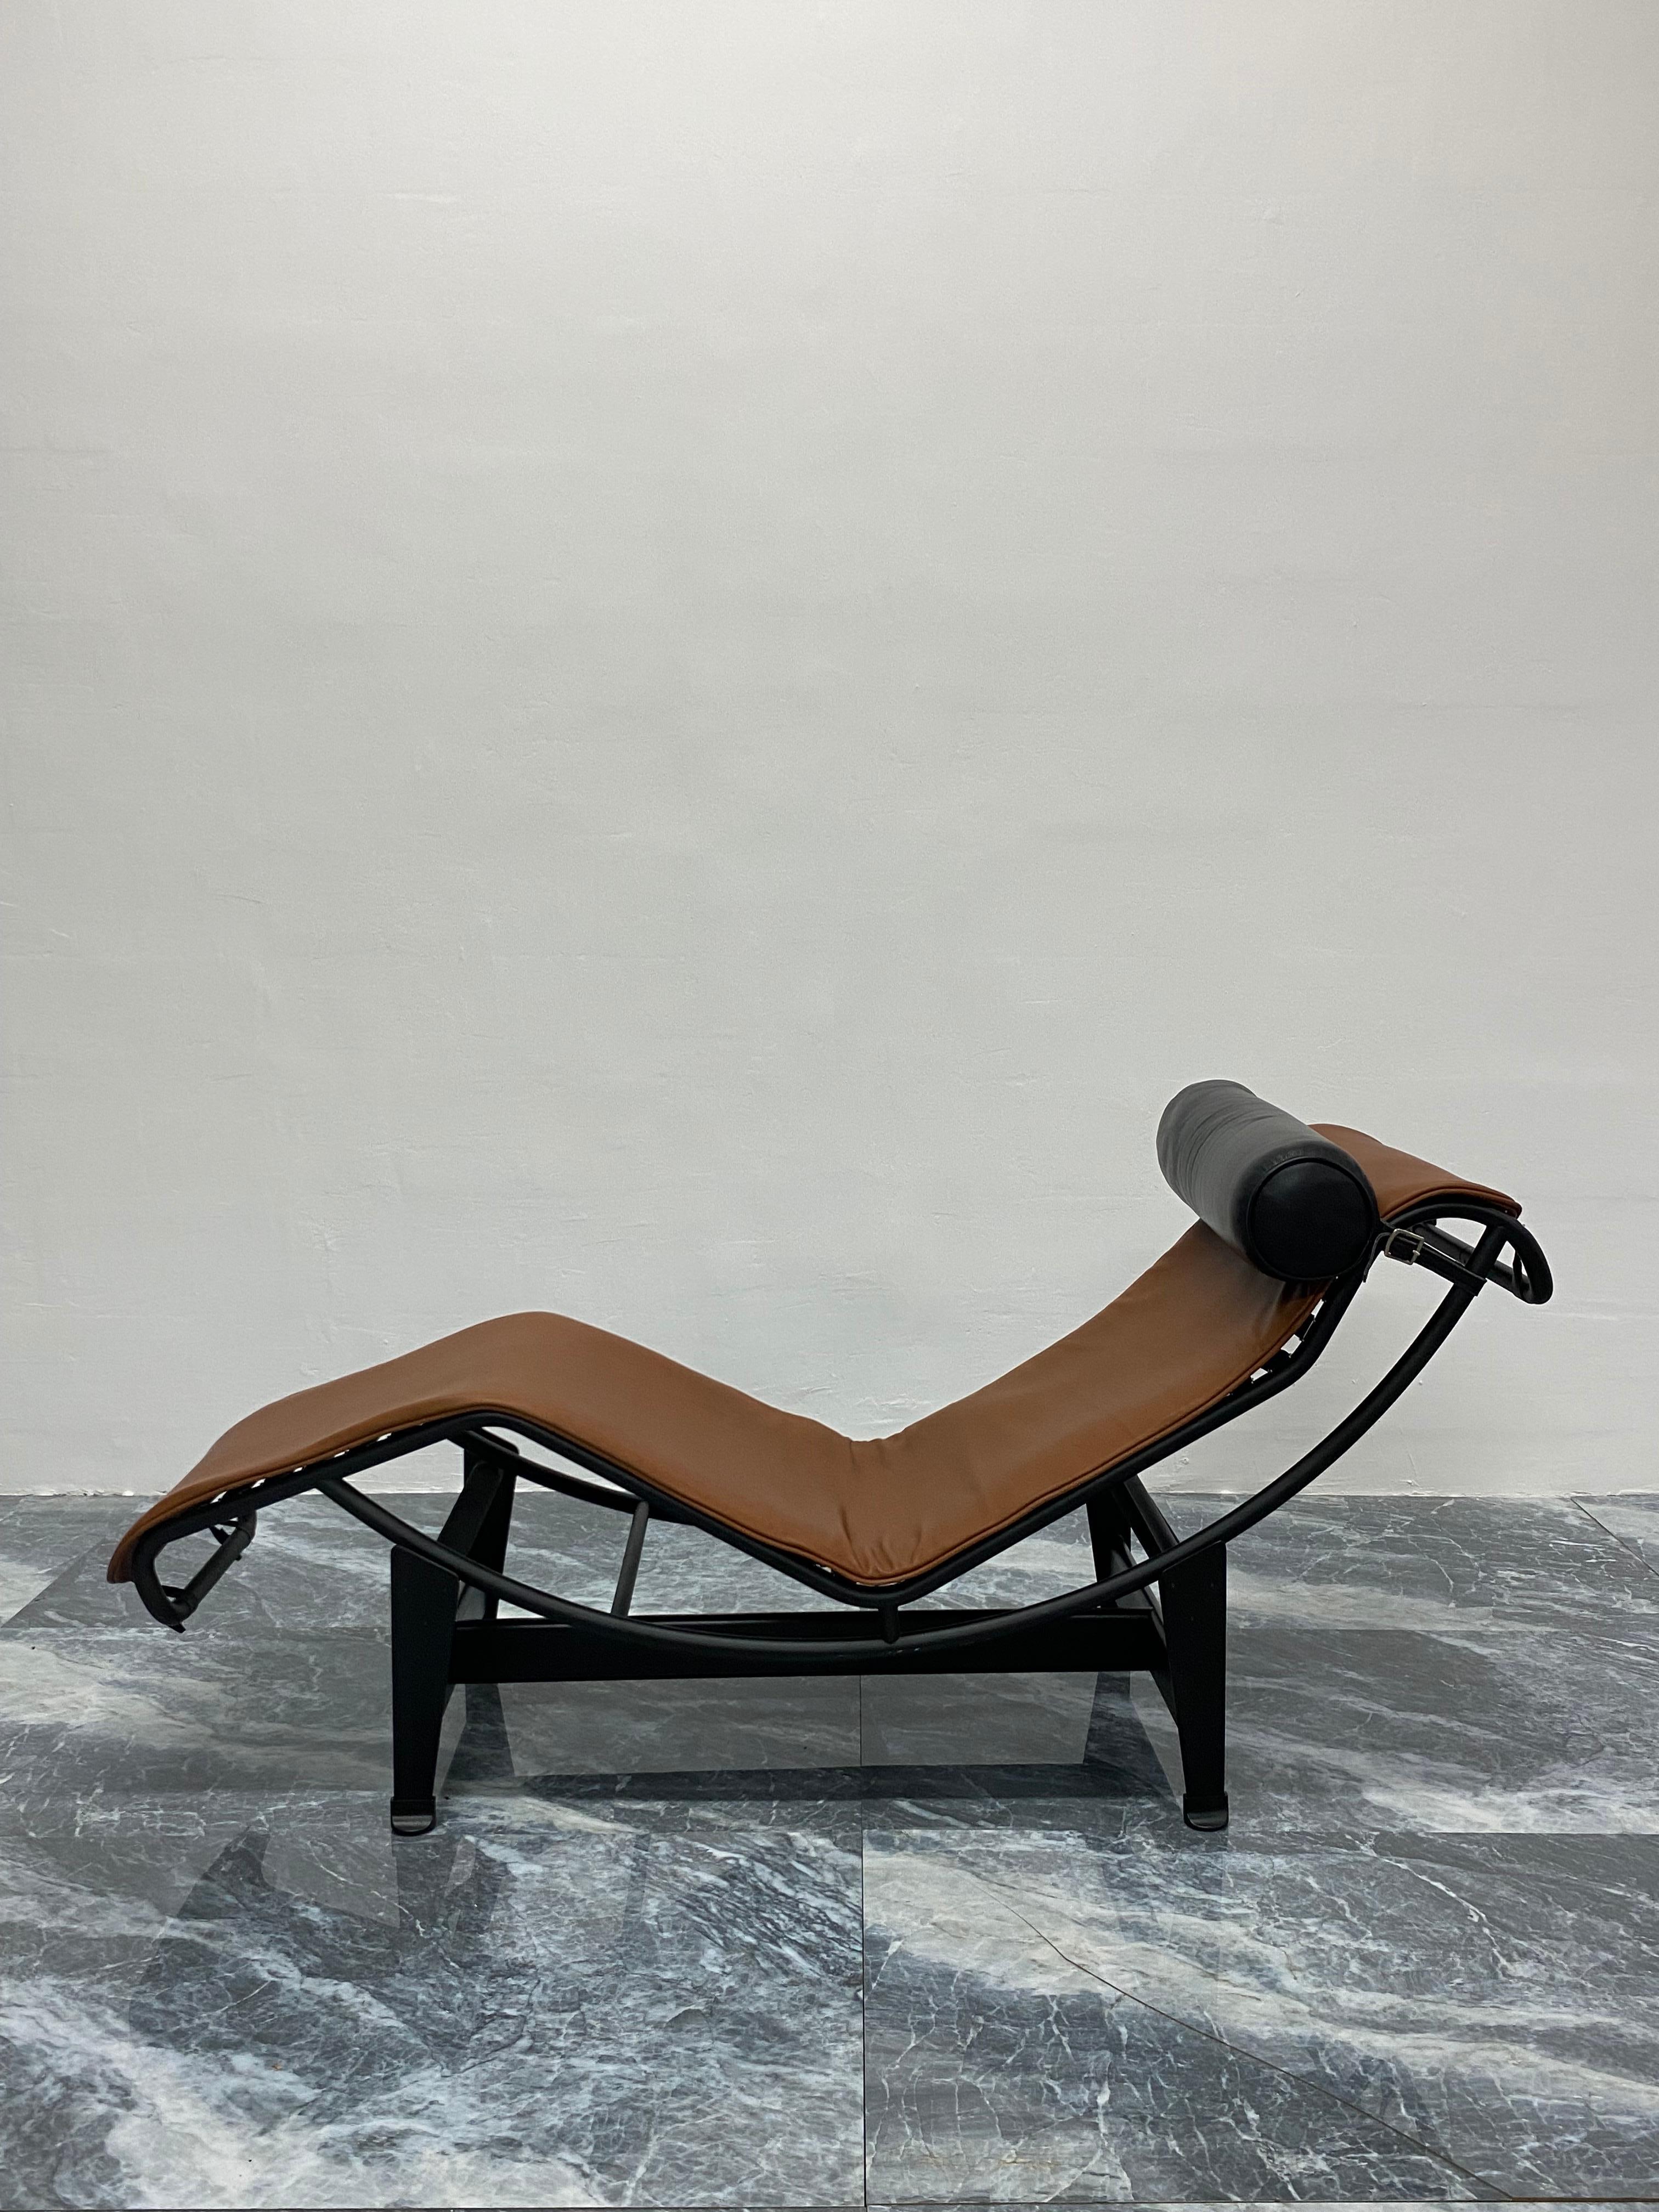 Brown leather LC4 Noire chaise lounge with black leather bolster pillow on black tubular chrome and black steel base by Le Corbusier, Pierre Jeanneret and Charlotte Perriand for Cassina. Signed and inscribed on the base and the chaise. 

In 1922, Le